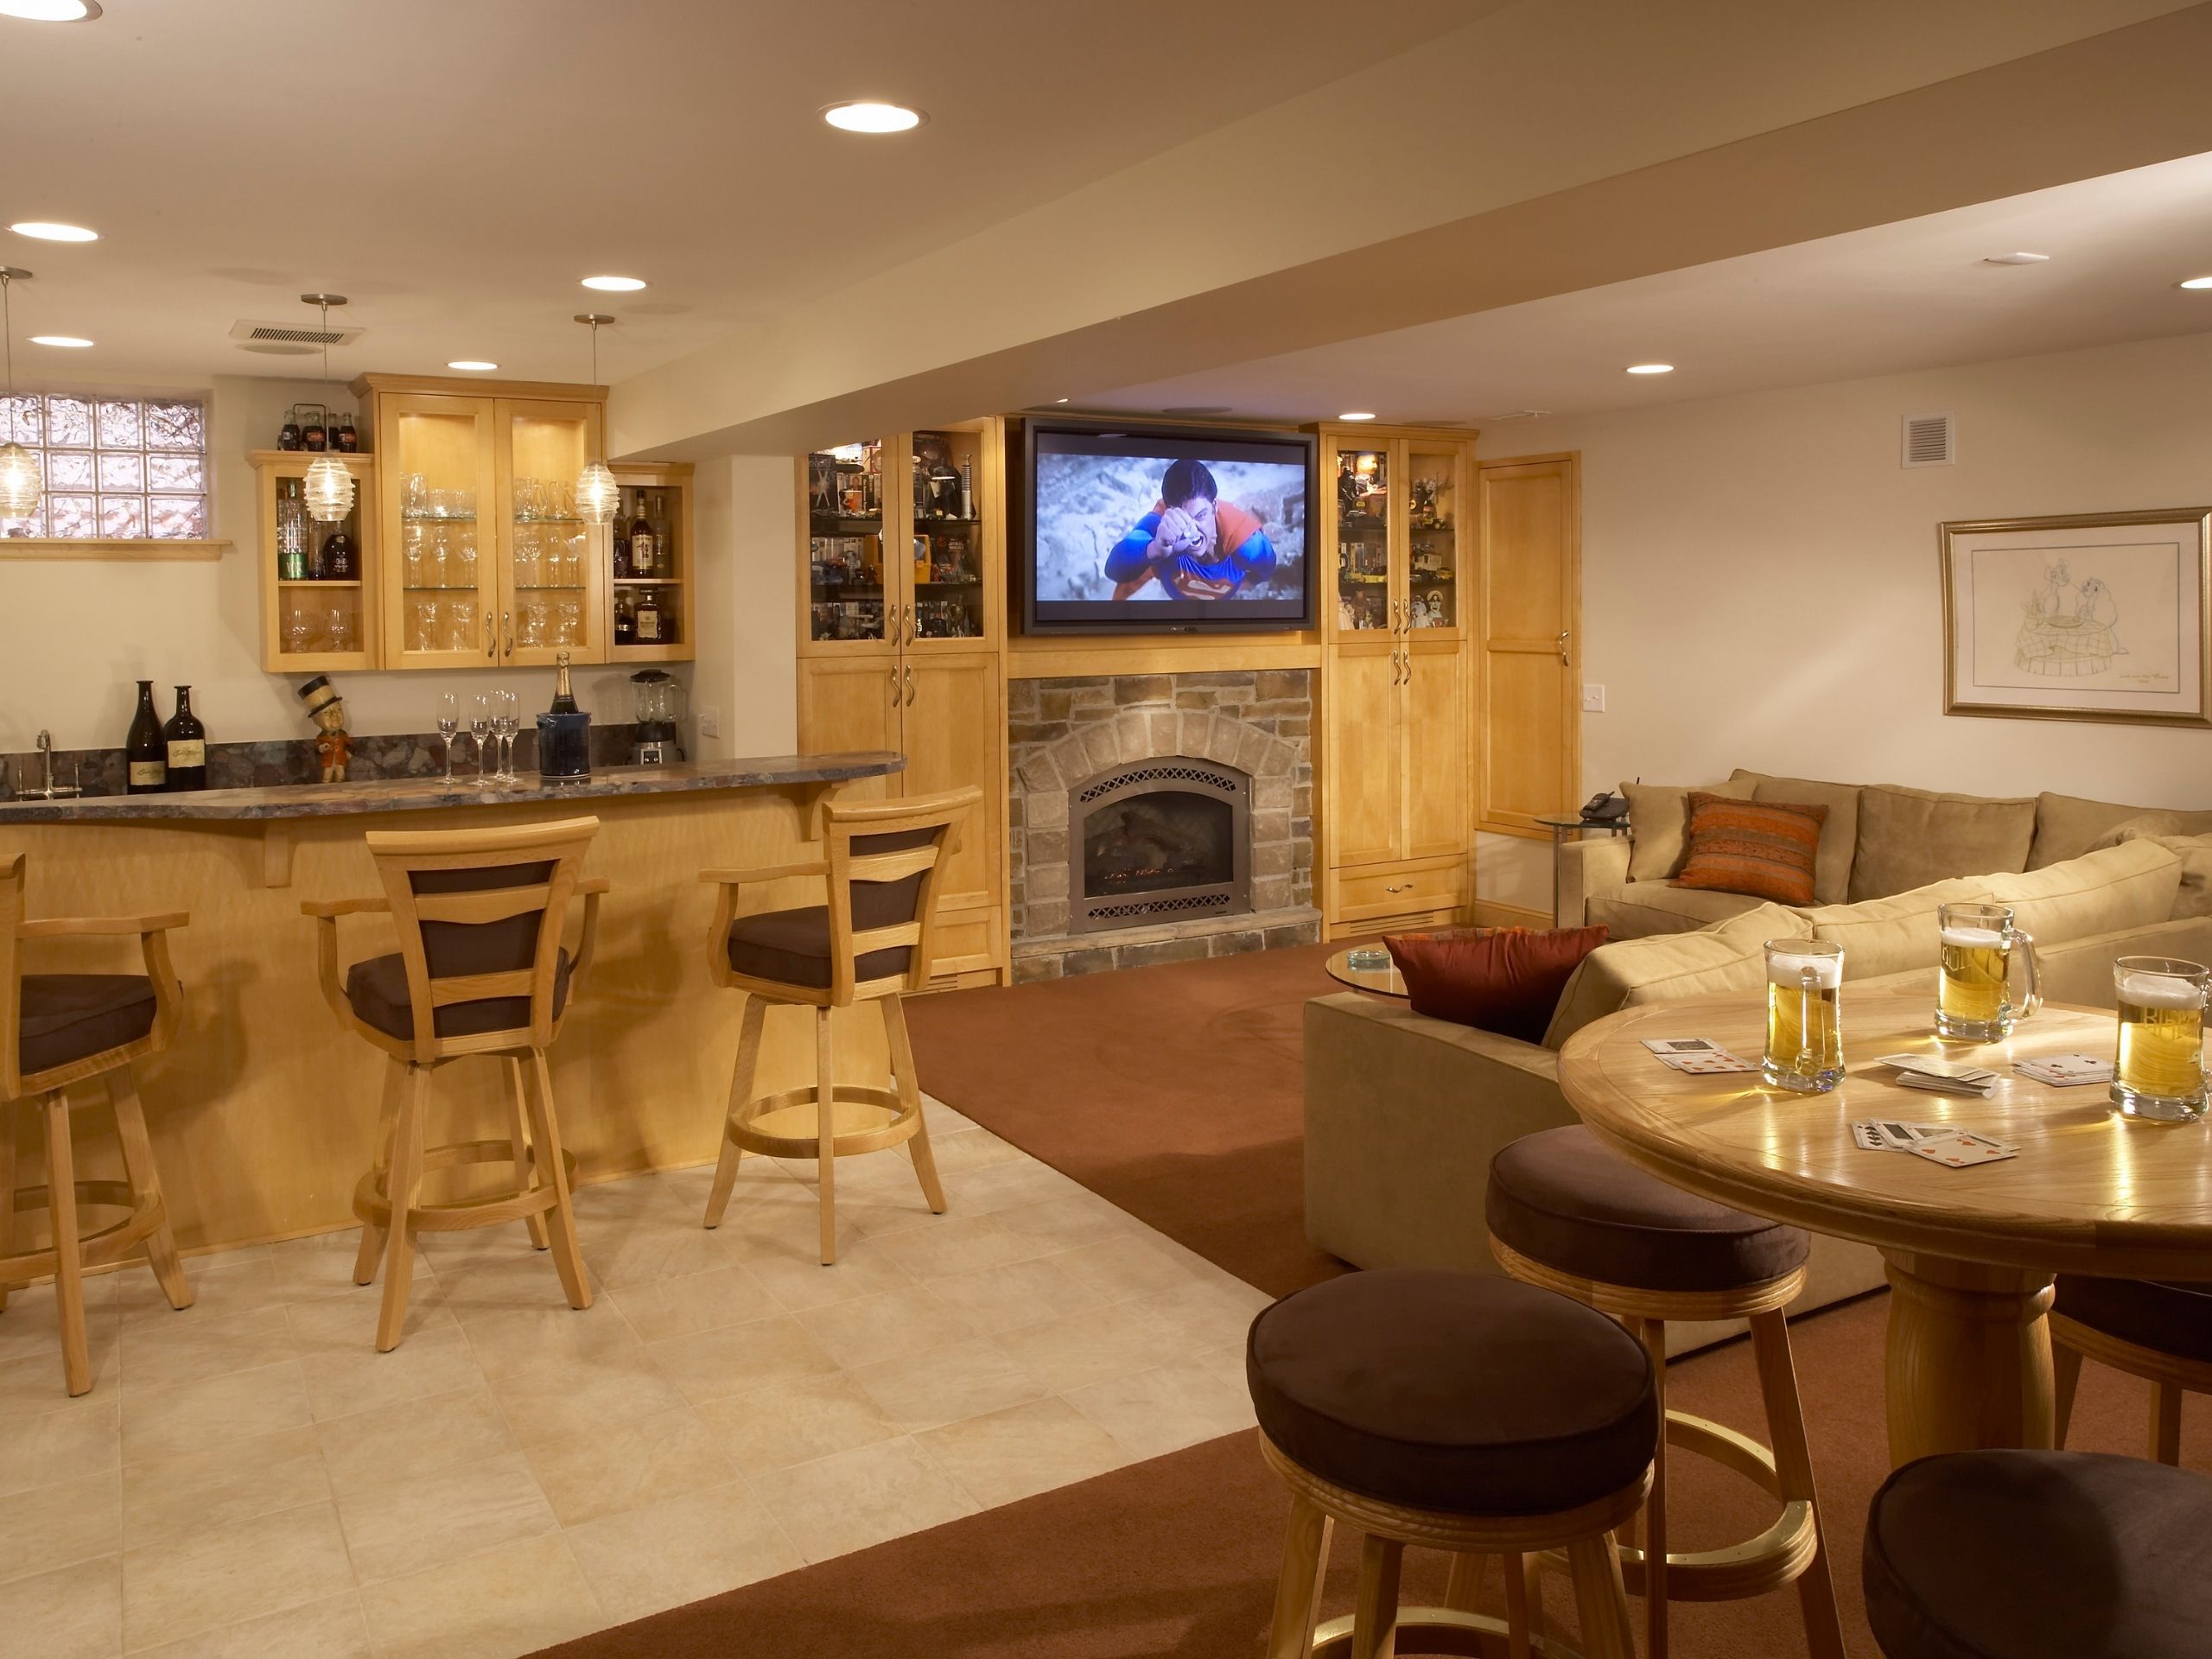 basement remodeling ideas: Basement bar and tv area with couch seating and beers on the table